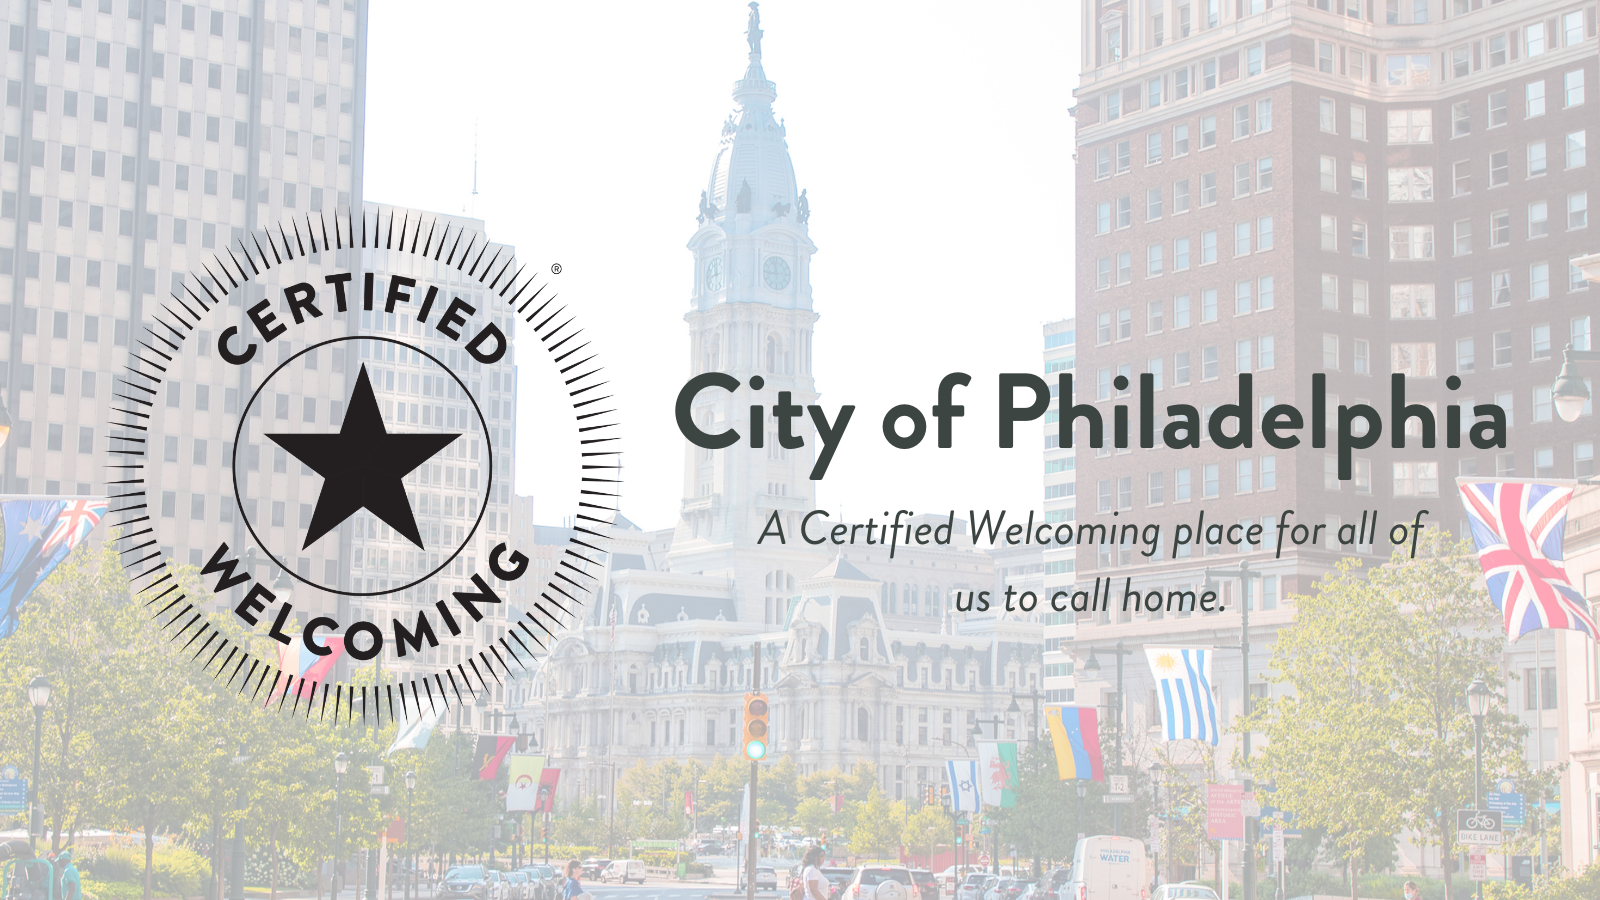 City of Philadelphia is in the background of an image with text overset displaying the Certified Welcoming logo and tagline